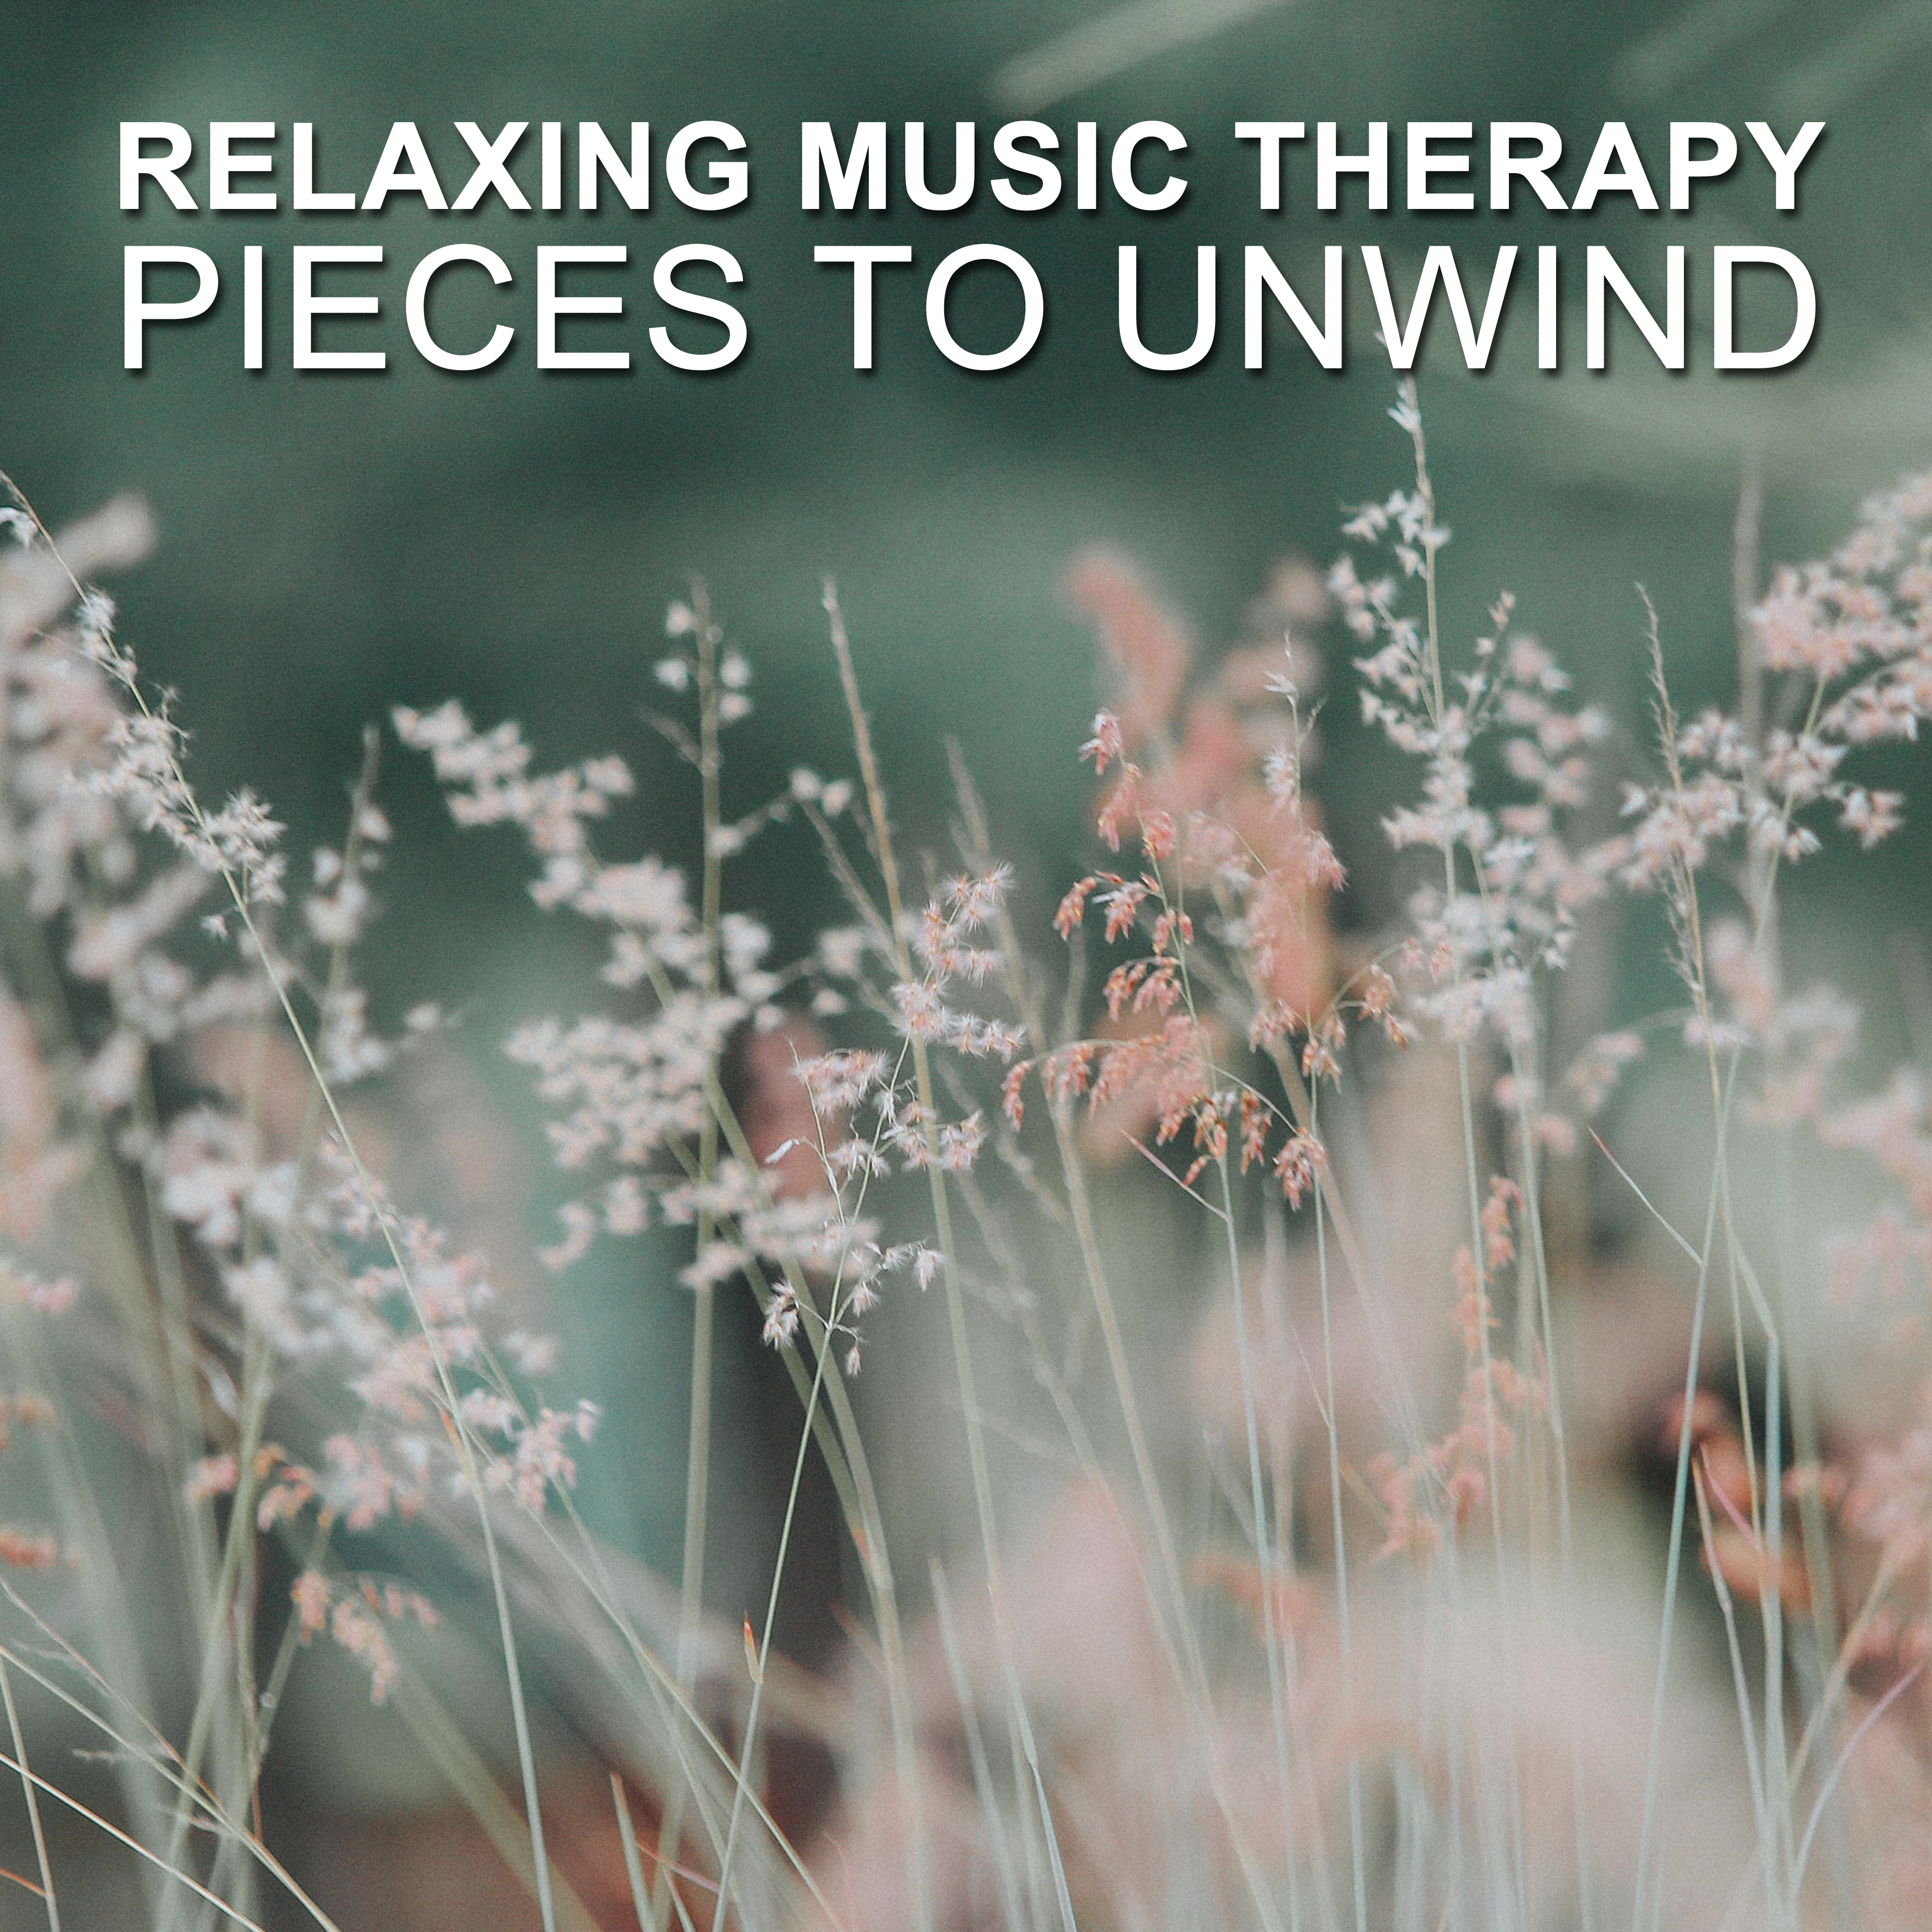 12 Relaxing Music Therapy Pieces to Unwind